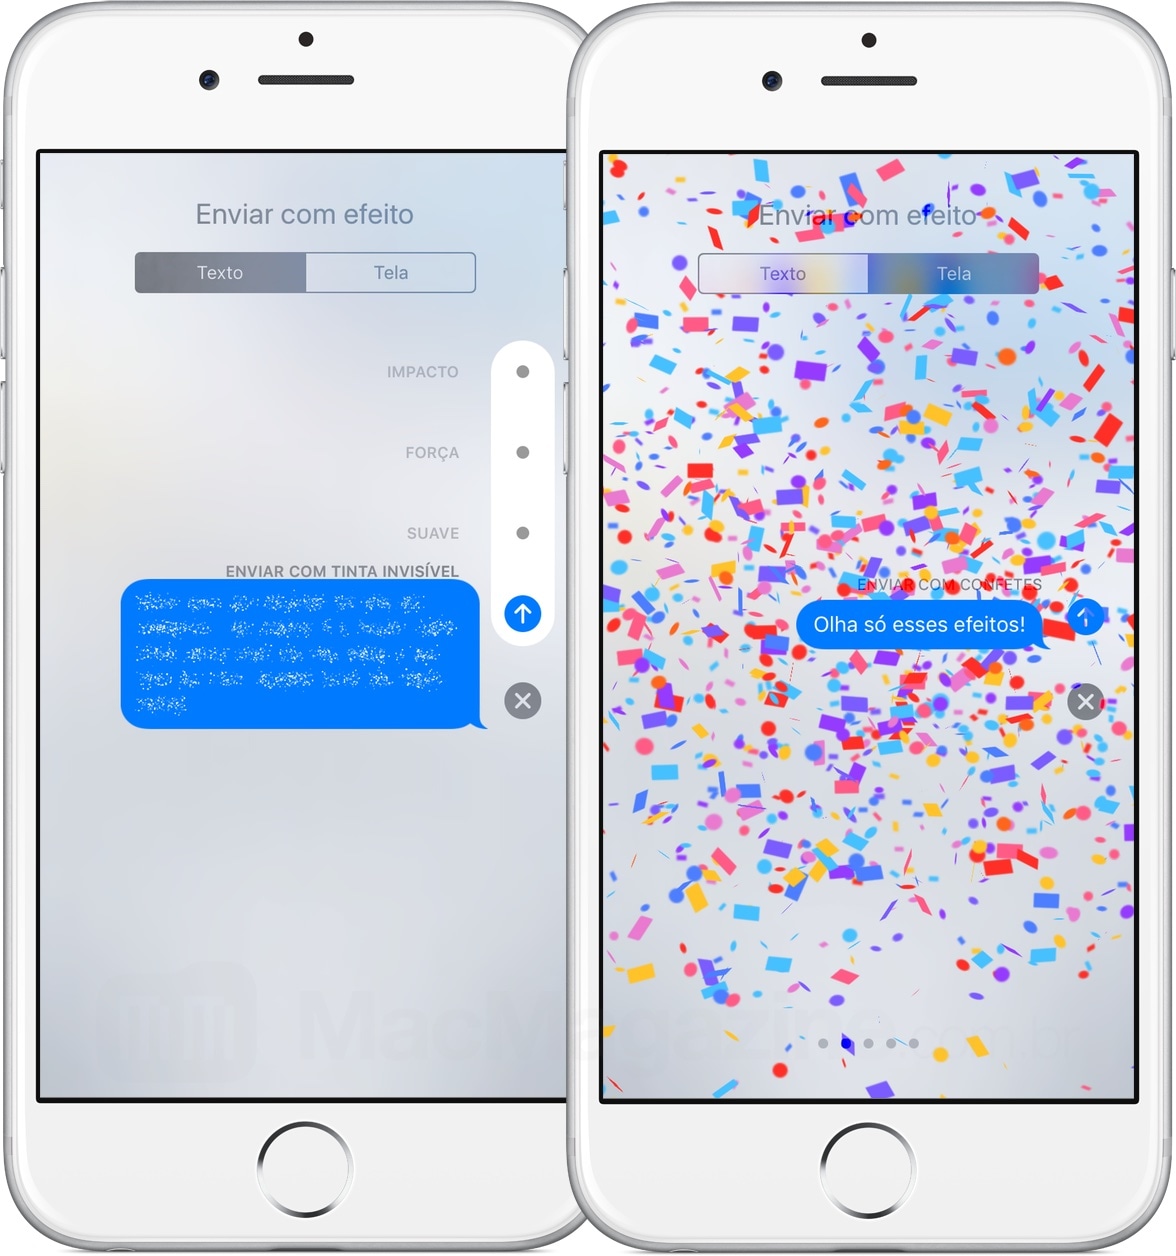 iOS 10: discover all the new features of iMessage